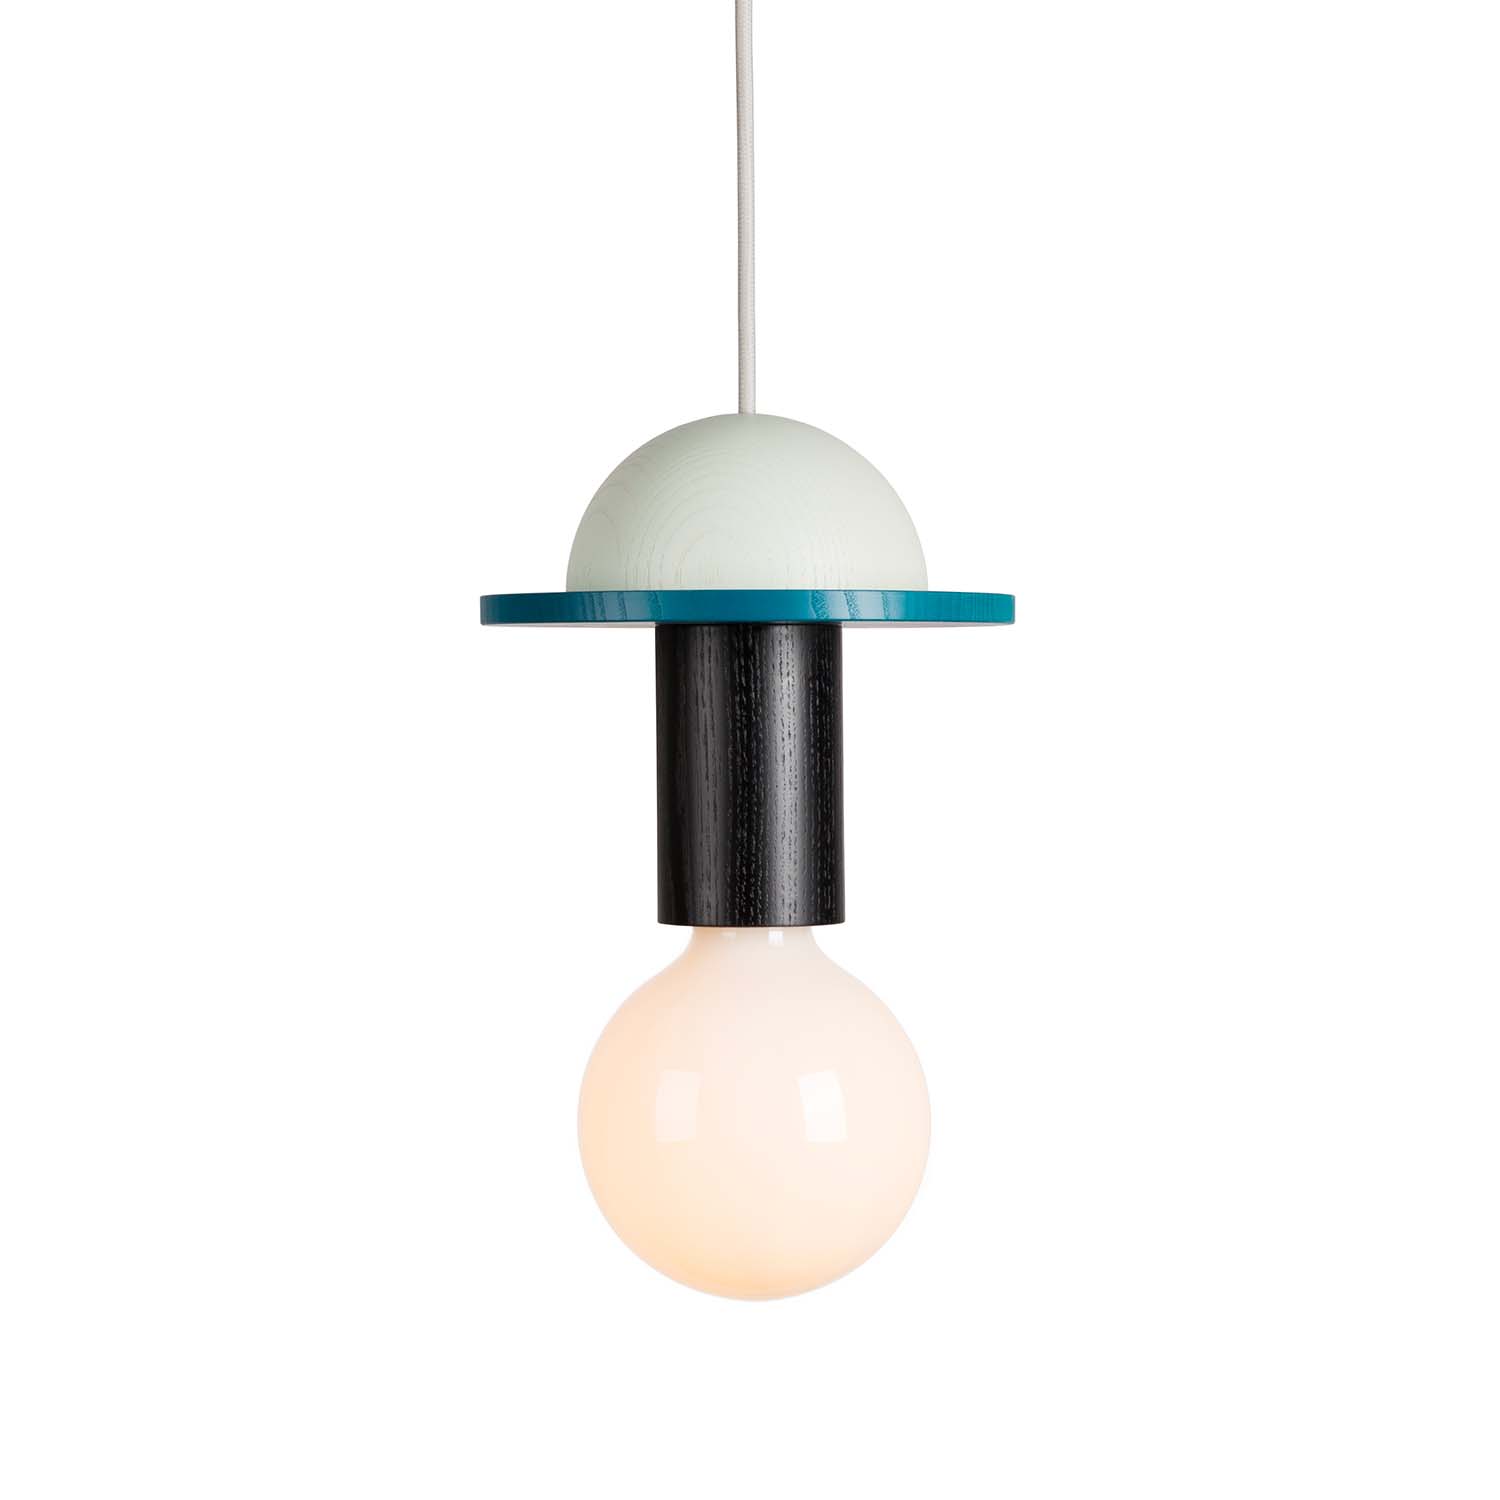 JUNIT - Fun and colorful ball-and-ball pendant light